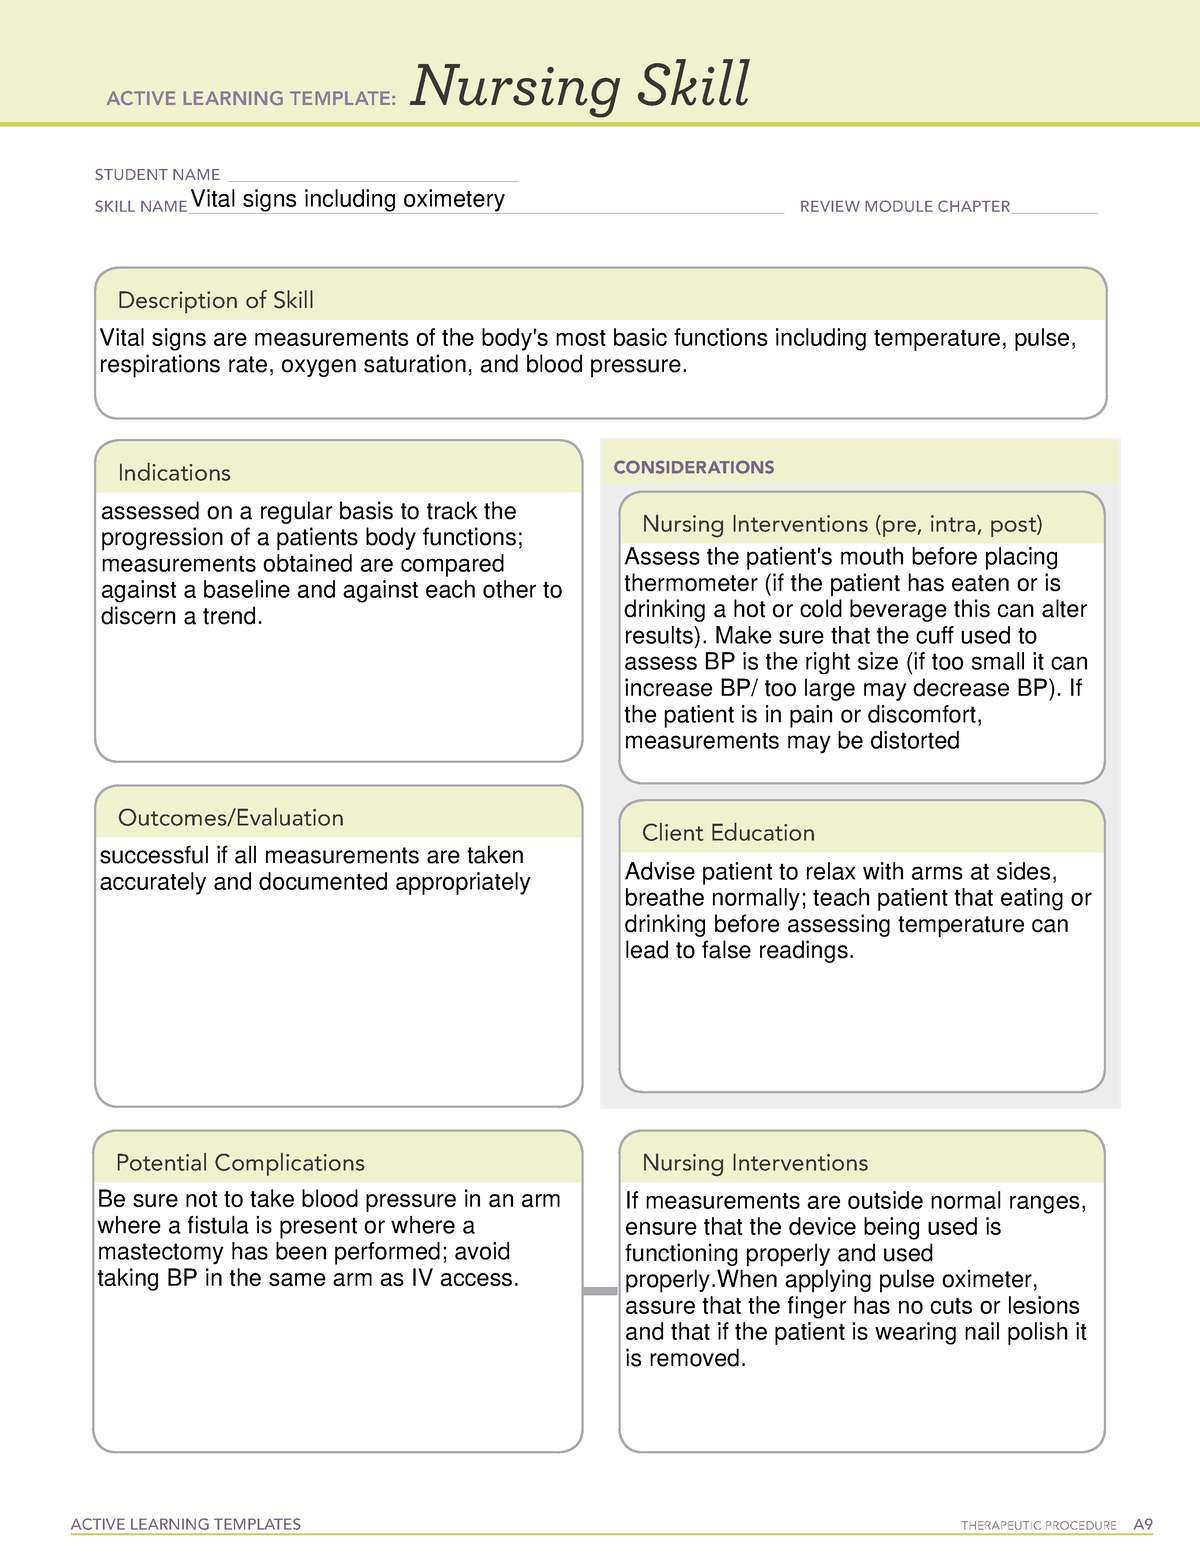 Vital signs ati template ACTIVE LEARNING TEMPLATES THERAPEUTIC